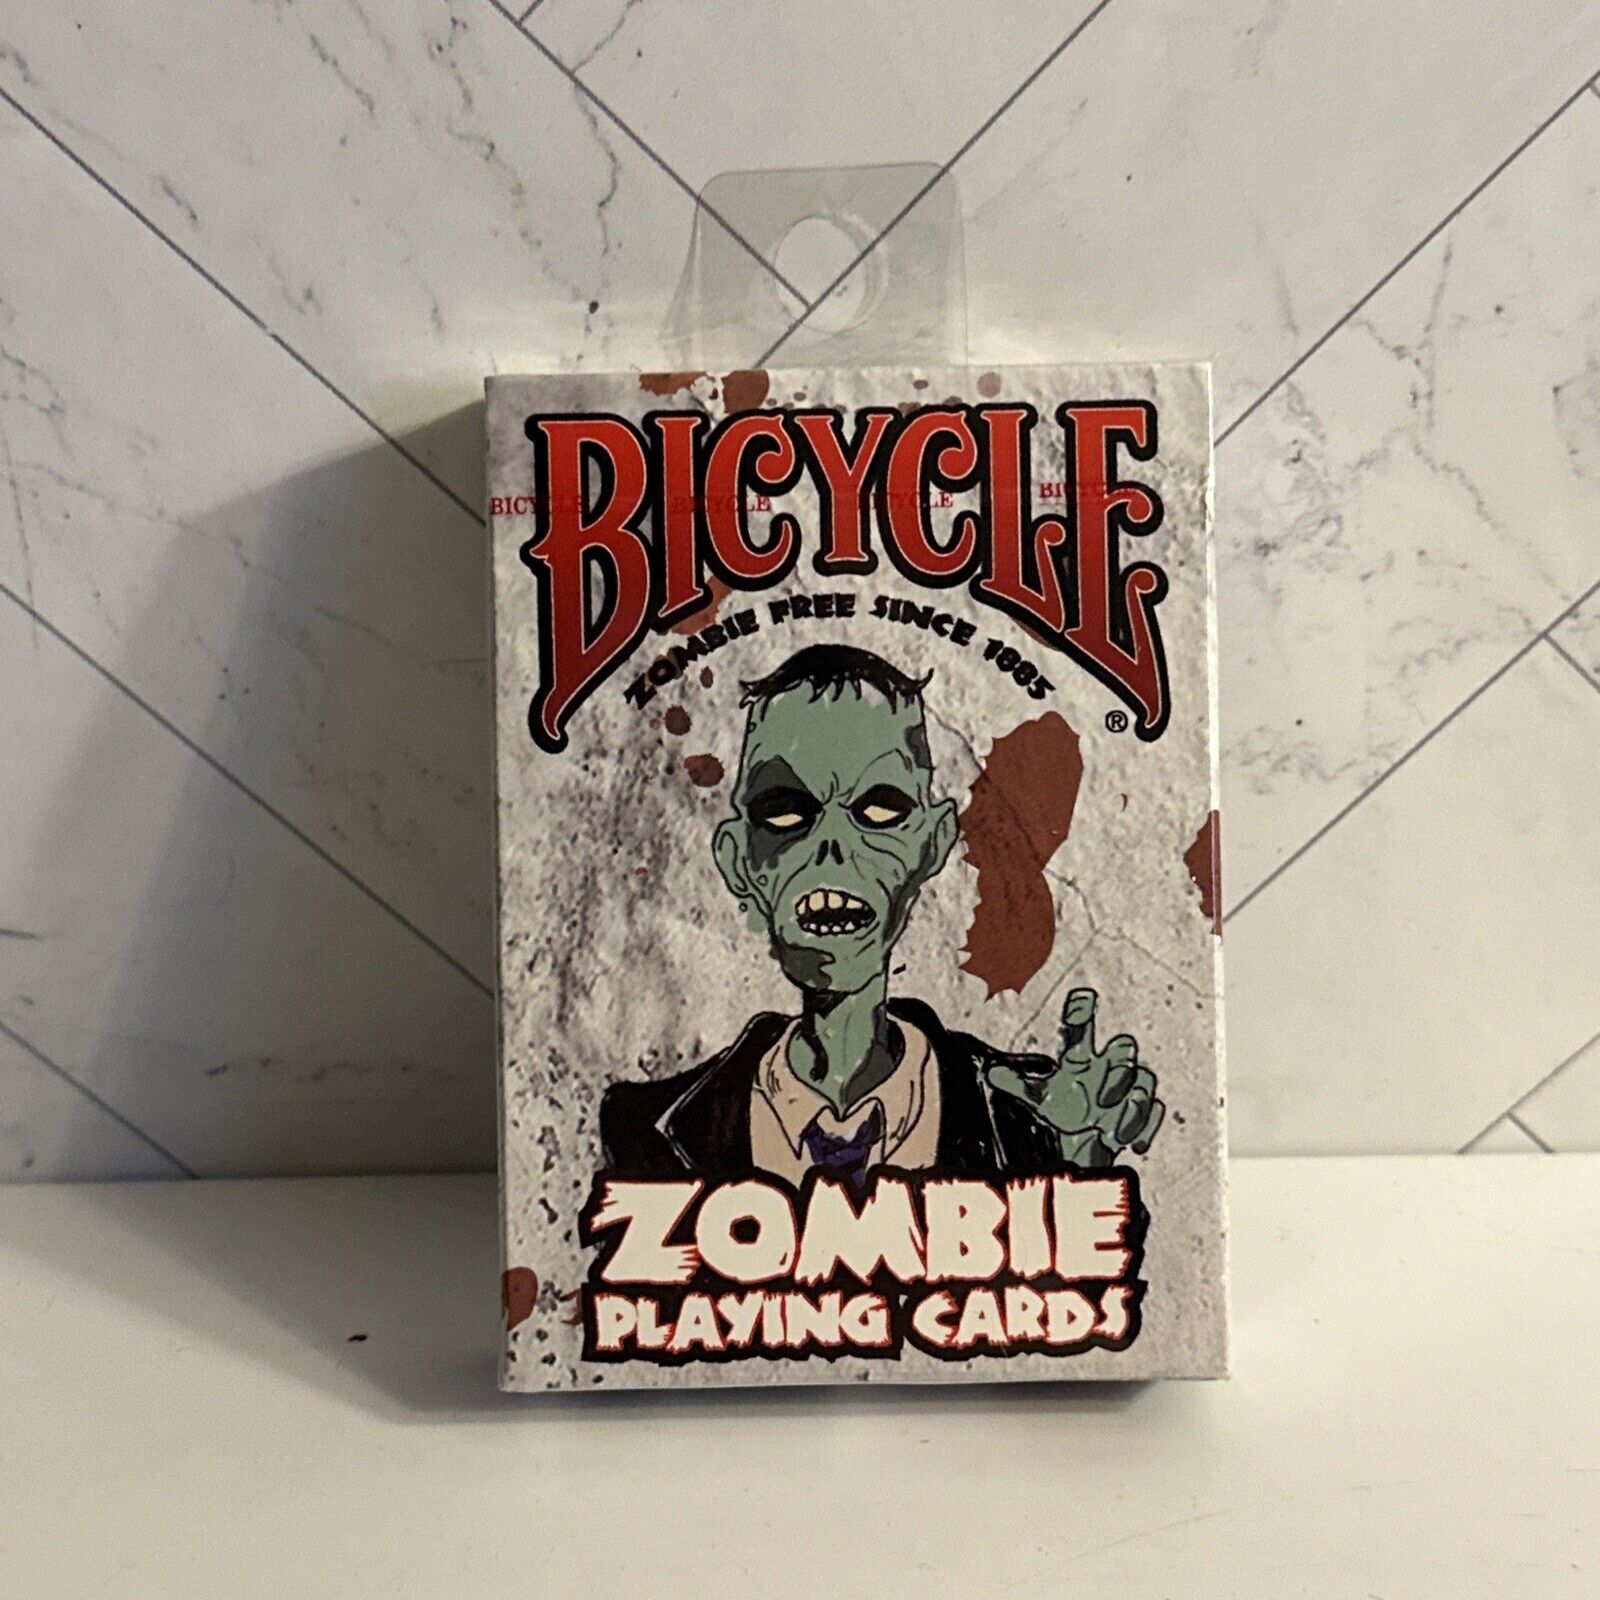 Bicycle Zombie Playing Cards Deck 2012 Funny Halloween New sealed